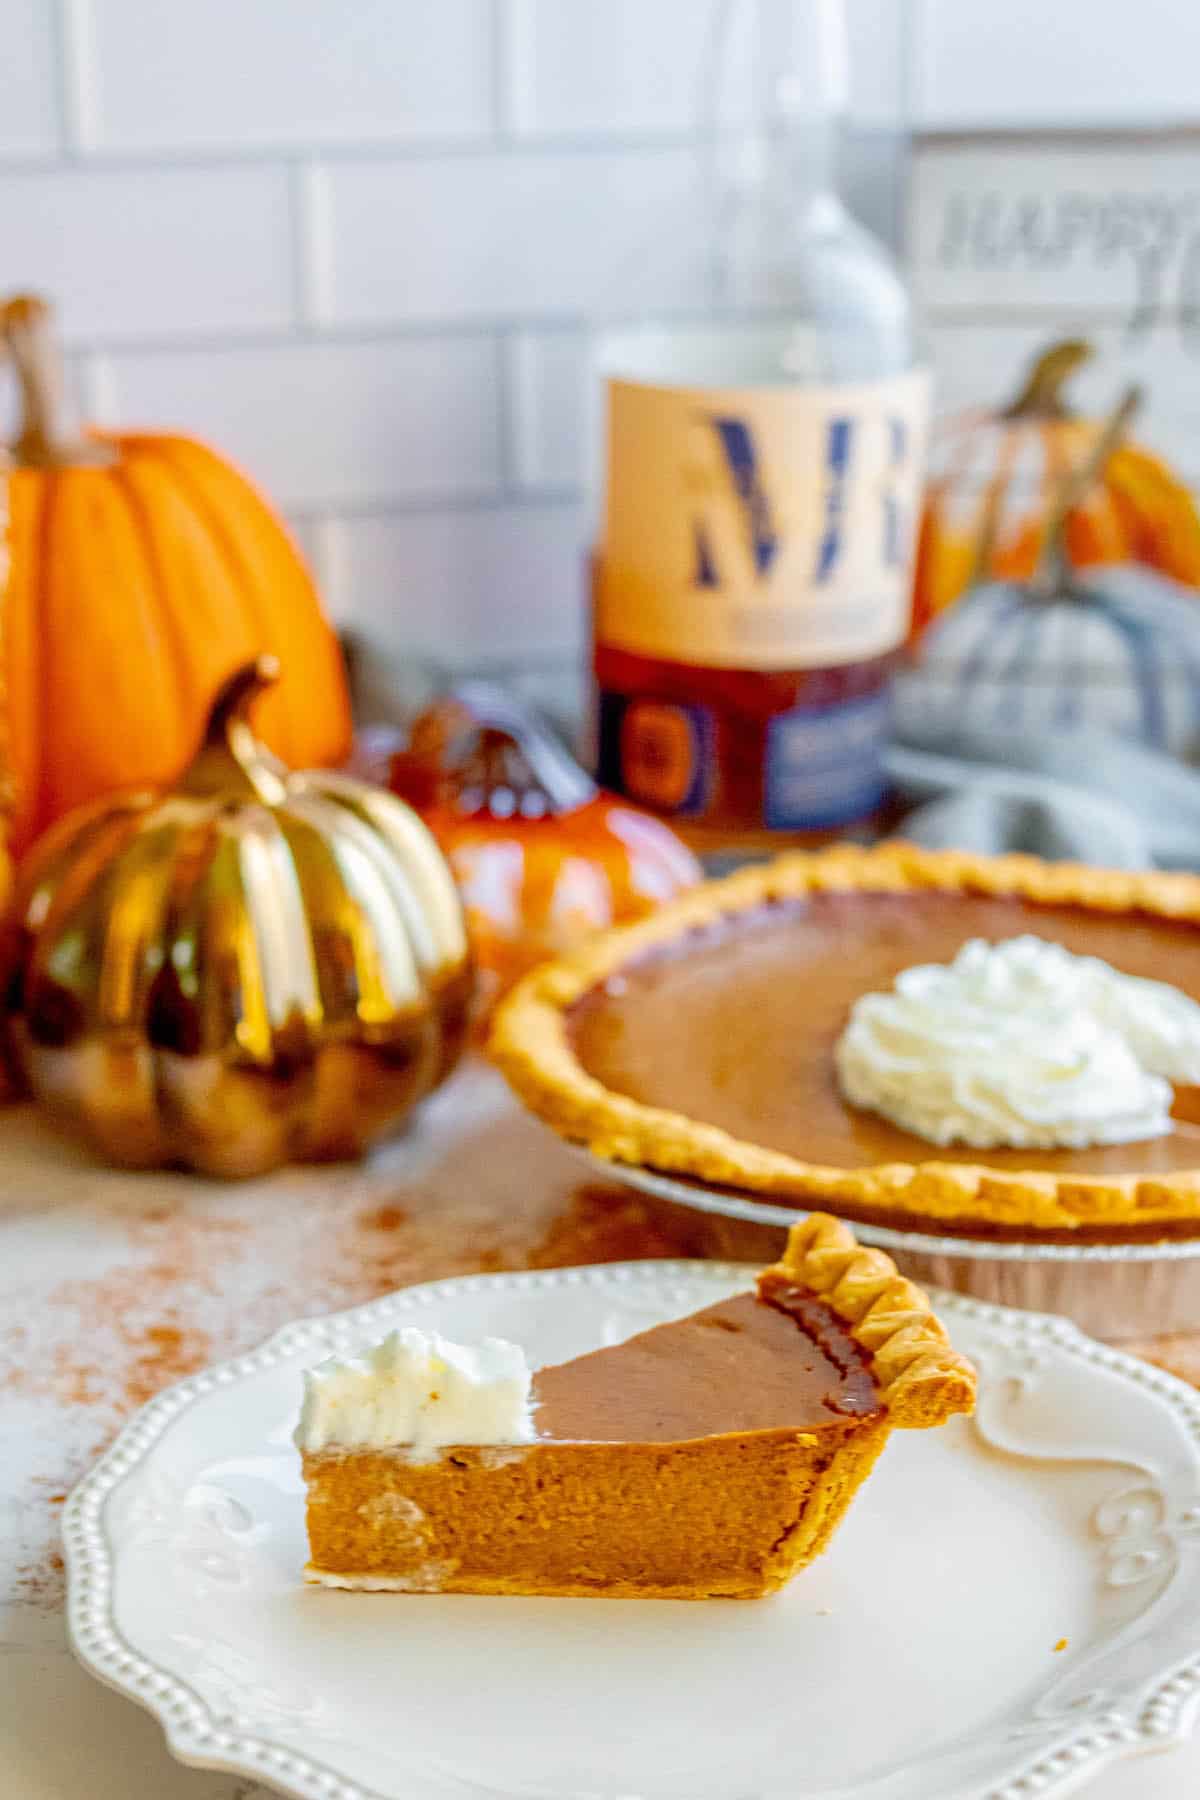 A slice of spicy pumpkin pie plated with bourbon.